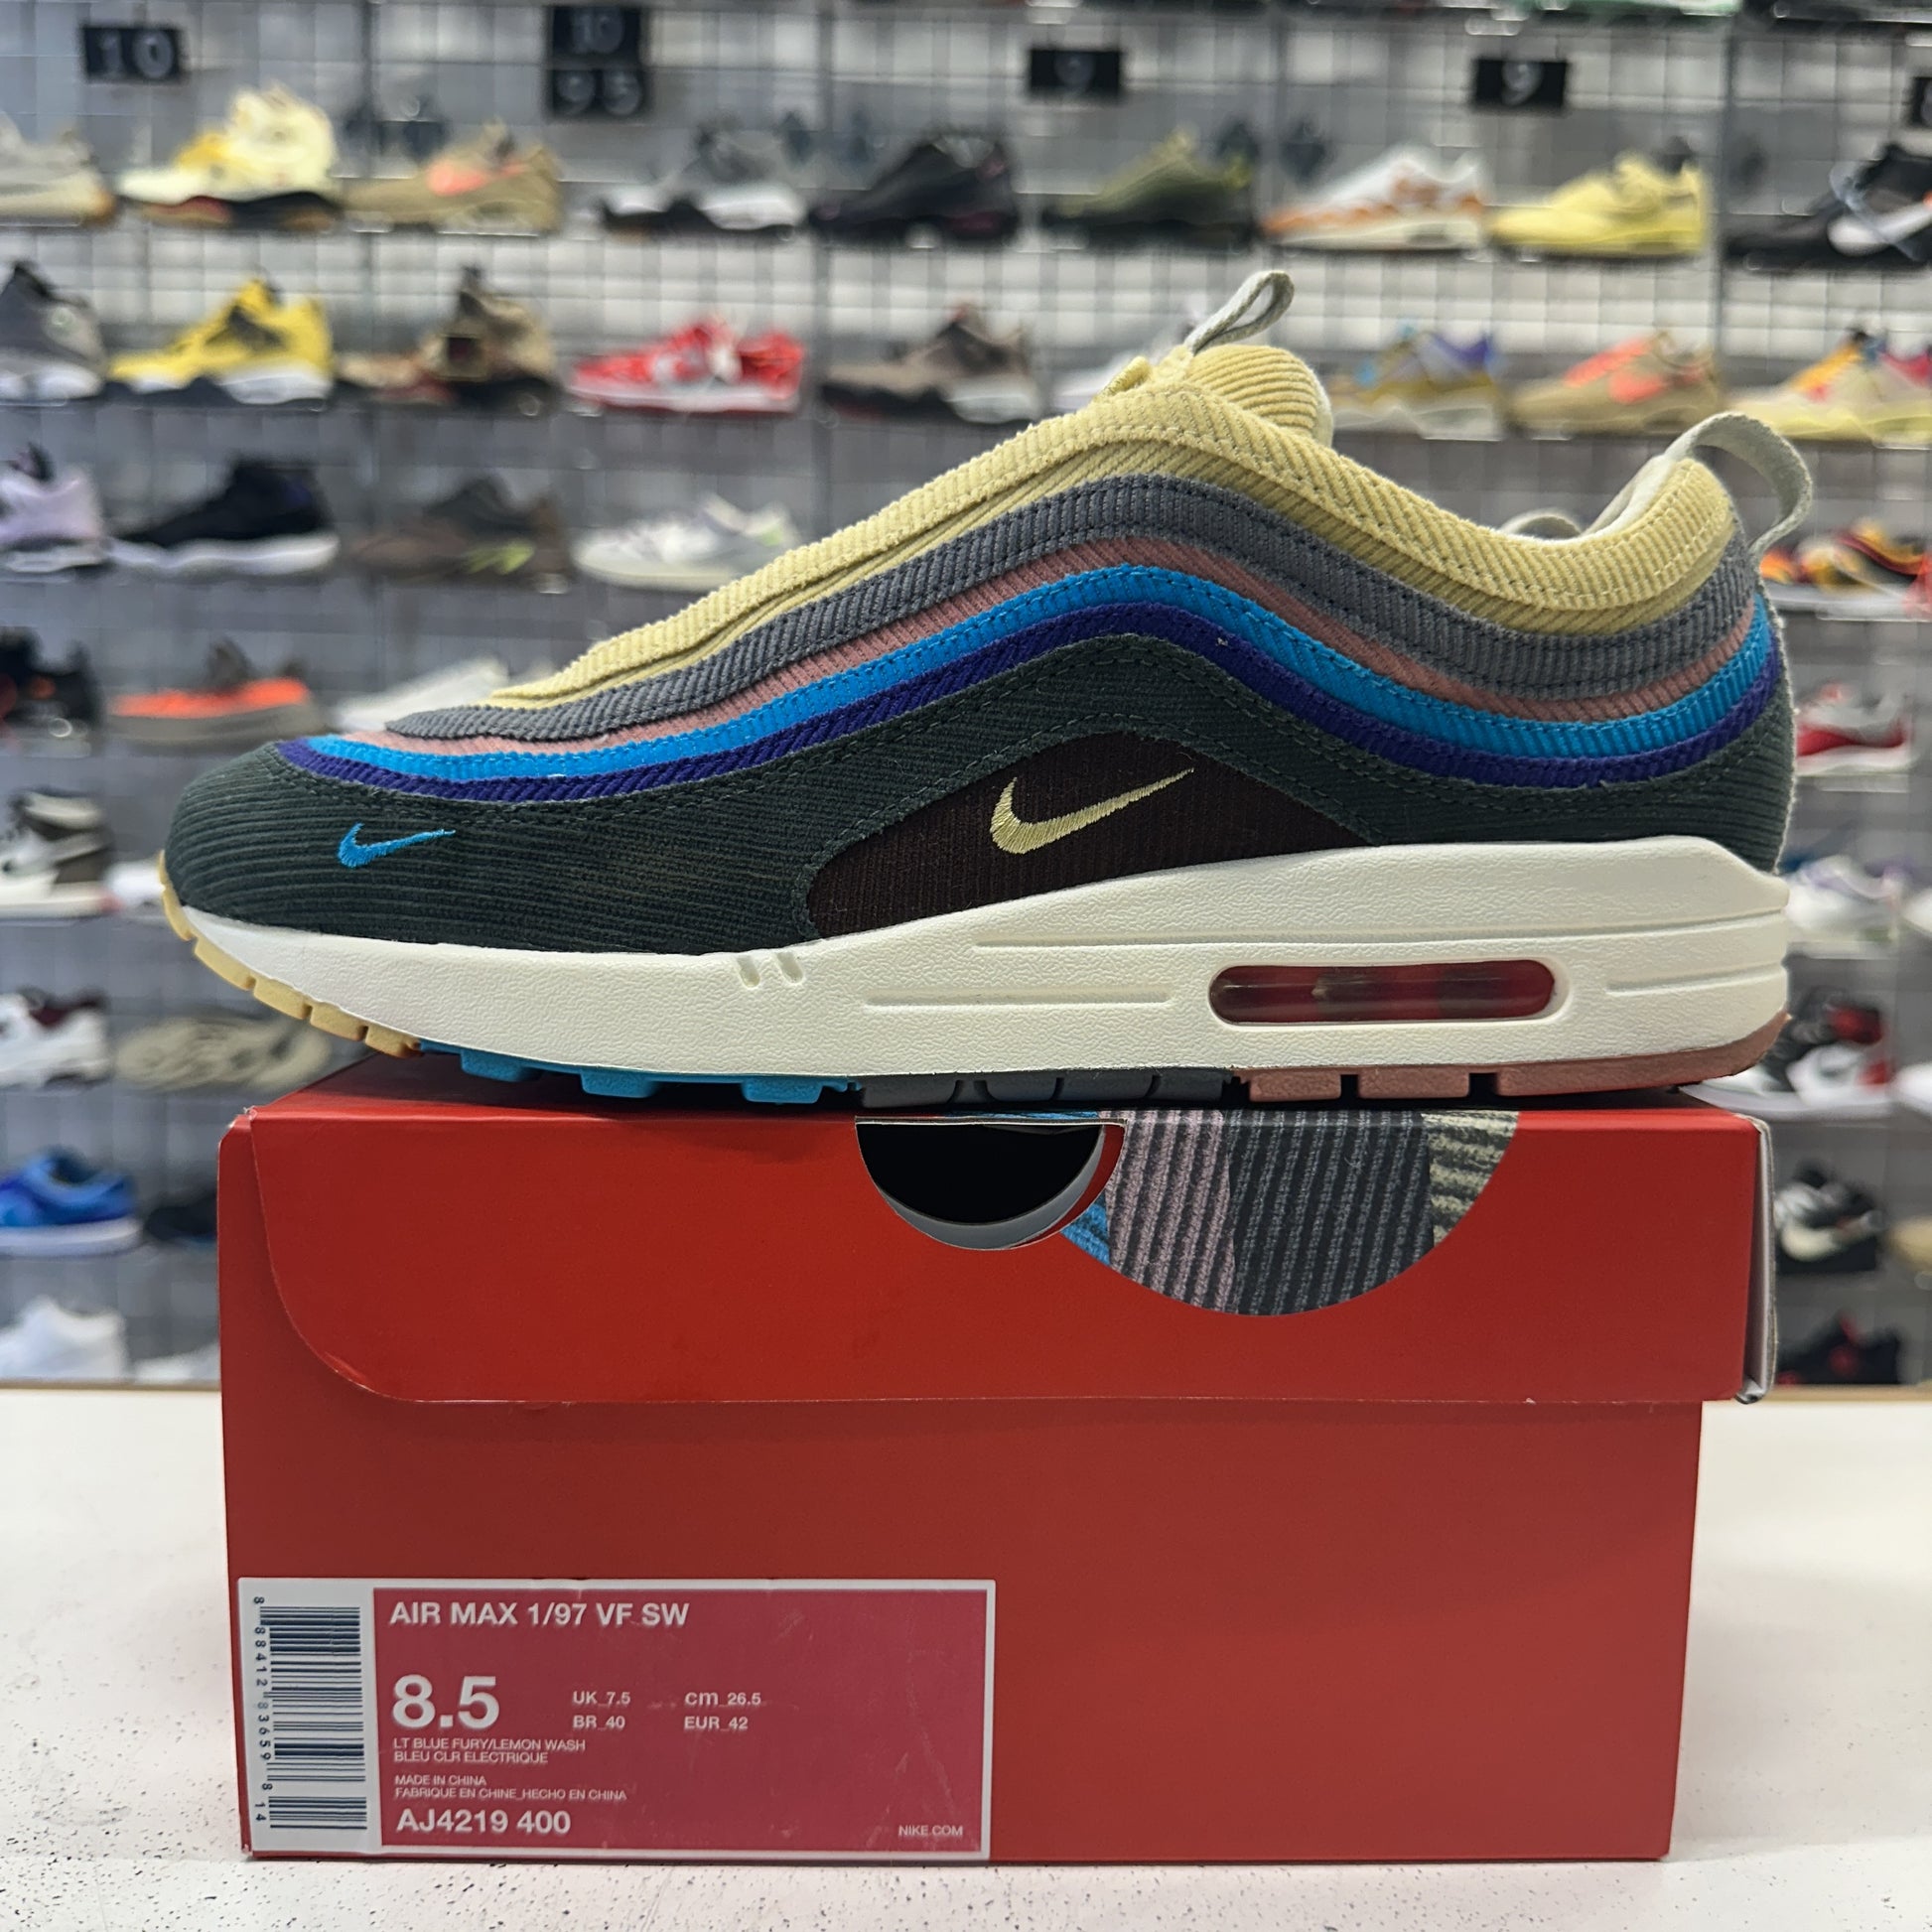 Nike Air Max 1-97 Wotherspoon UK7.5